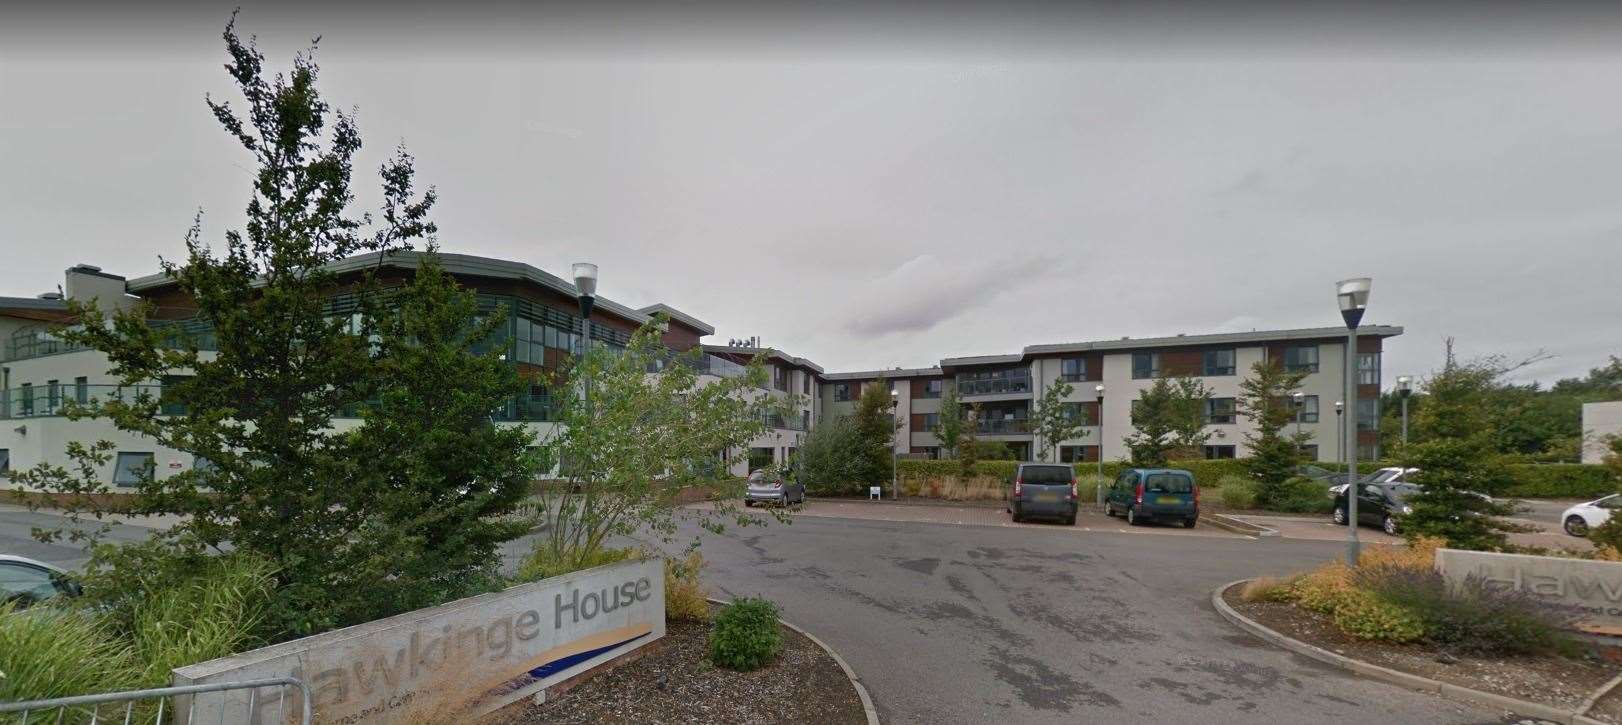 Care home residents who are discharged from hospital with coronavirus are being cared for at Hawkinge House. Picture: Google Street View